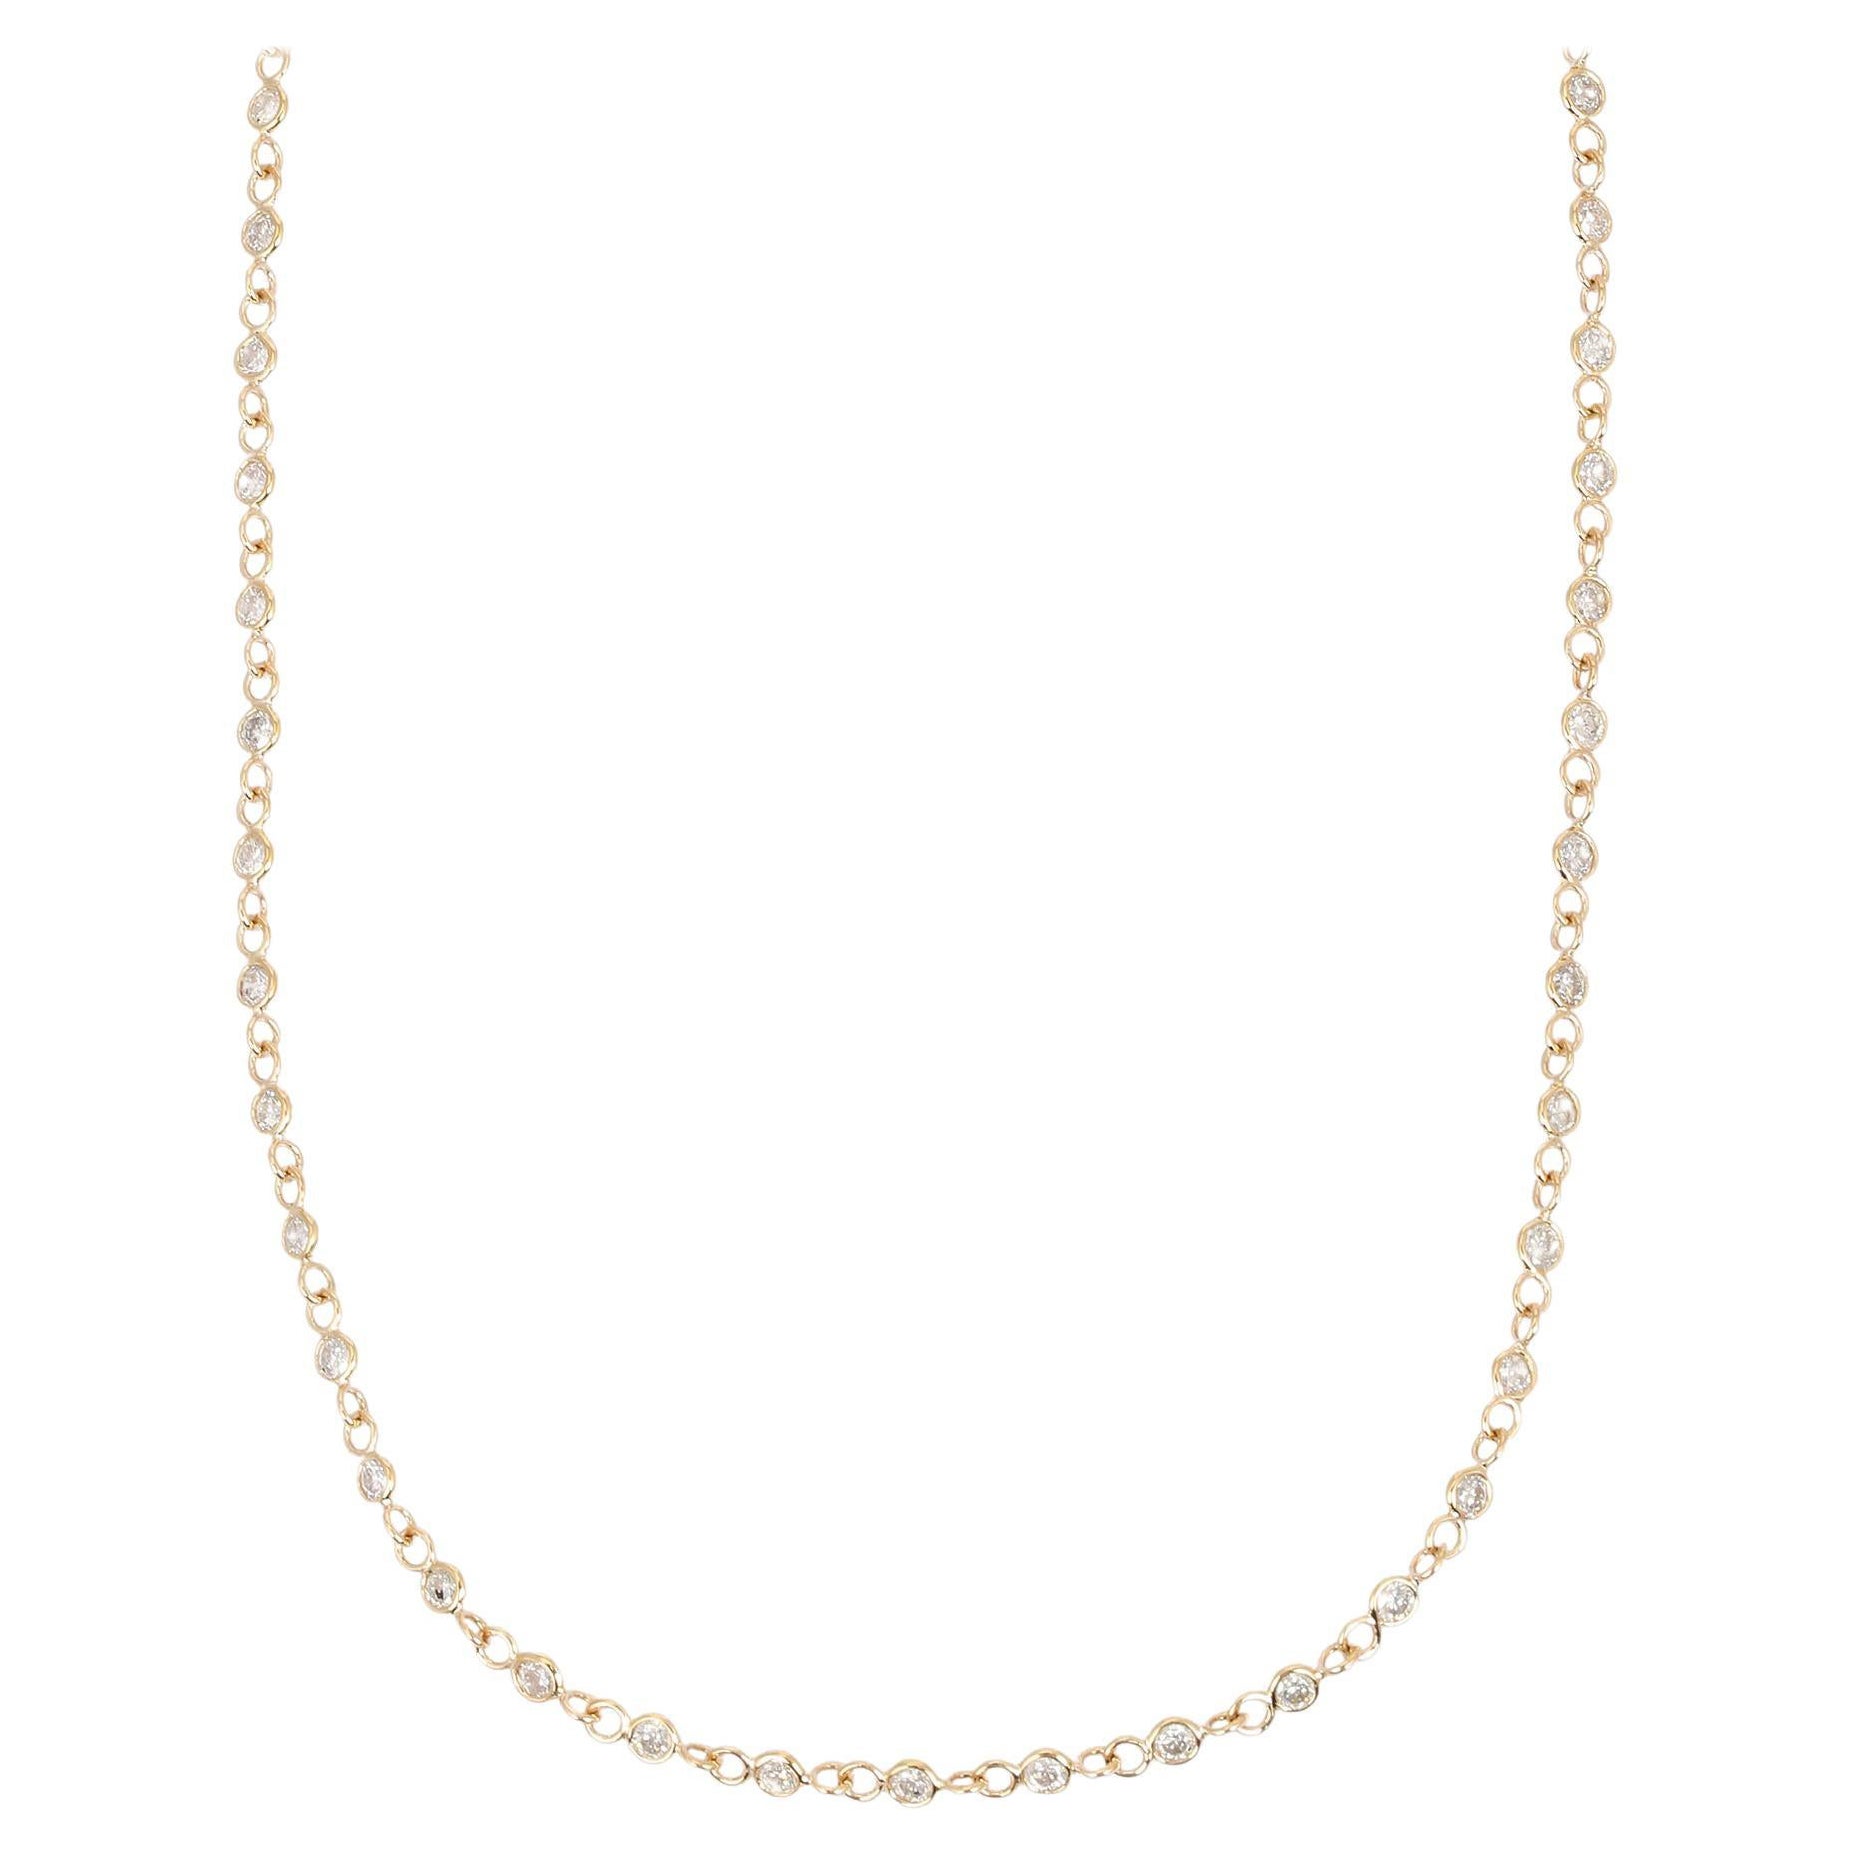 Fine Diamond Long Necklace 14k Solid Yellow Gold, Christmas Gift For Women For Sale